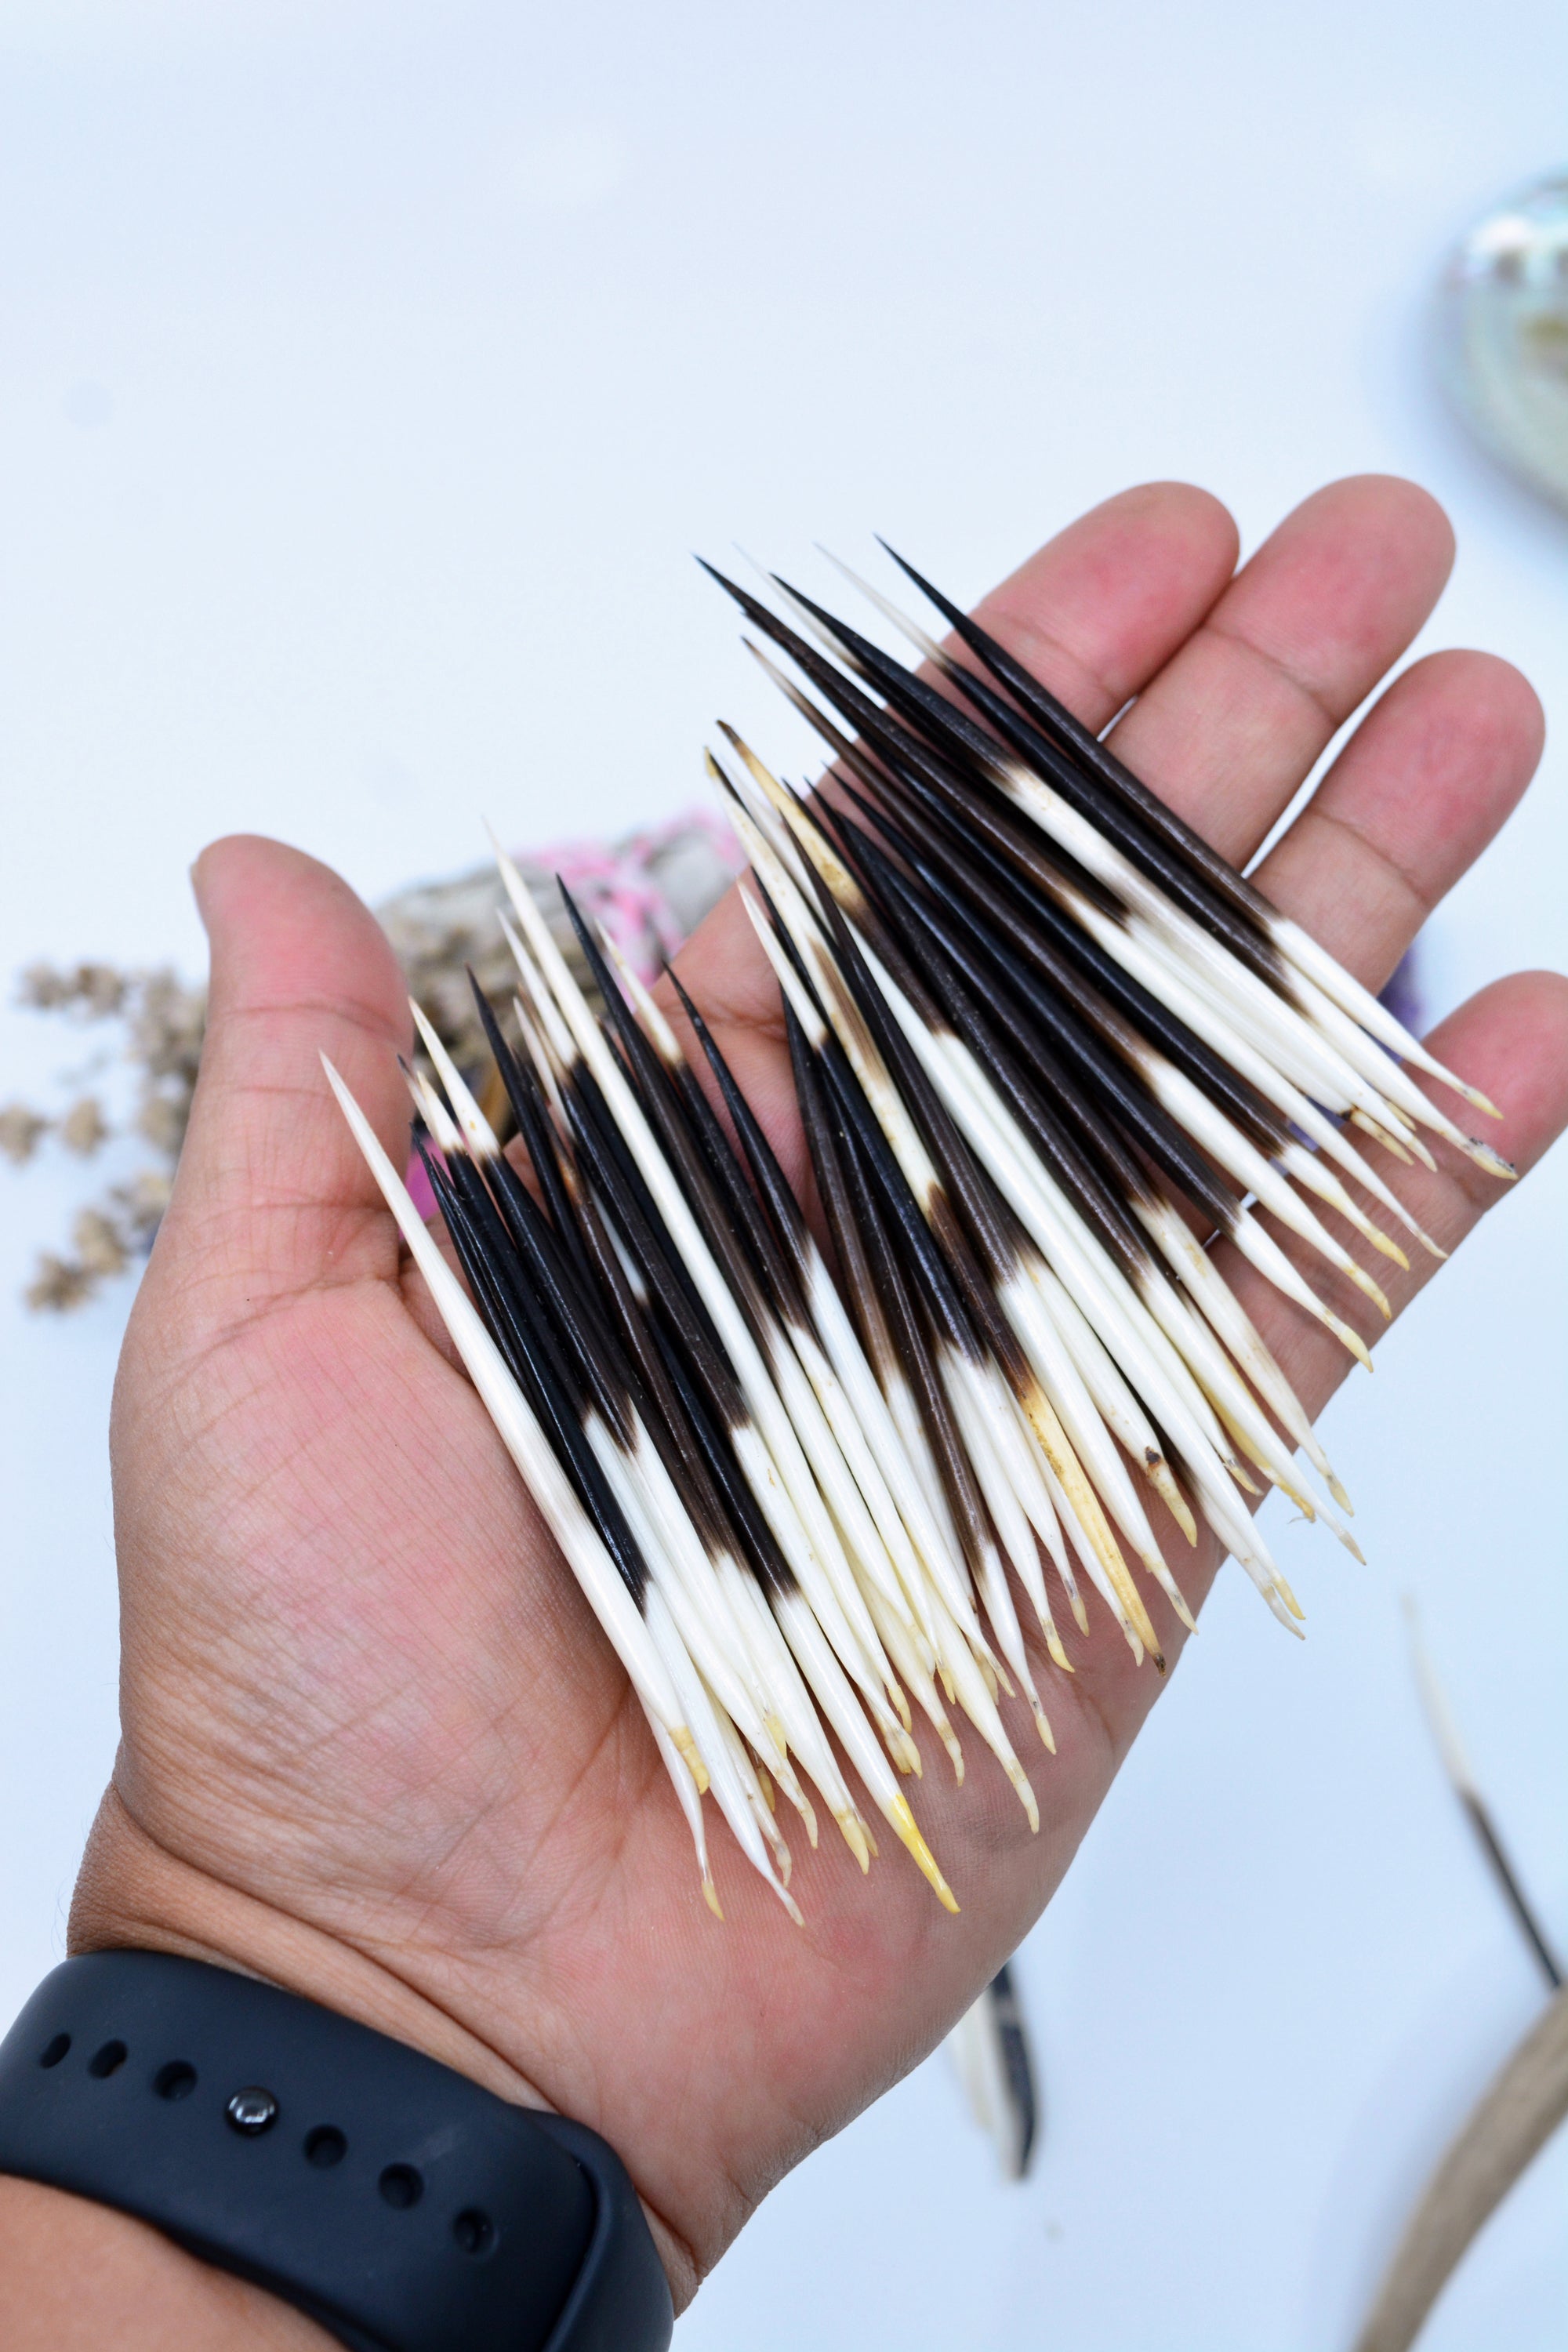 Dulles CBP Finds 100 Prohibited Porcupine Quills